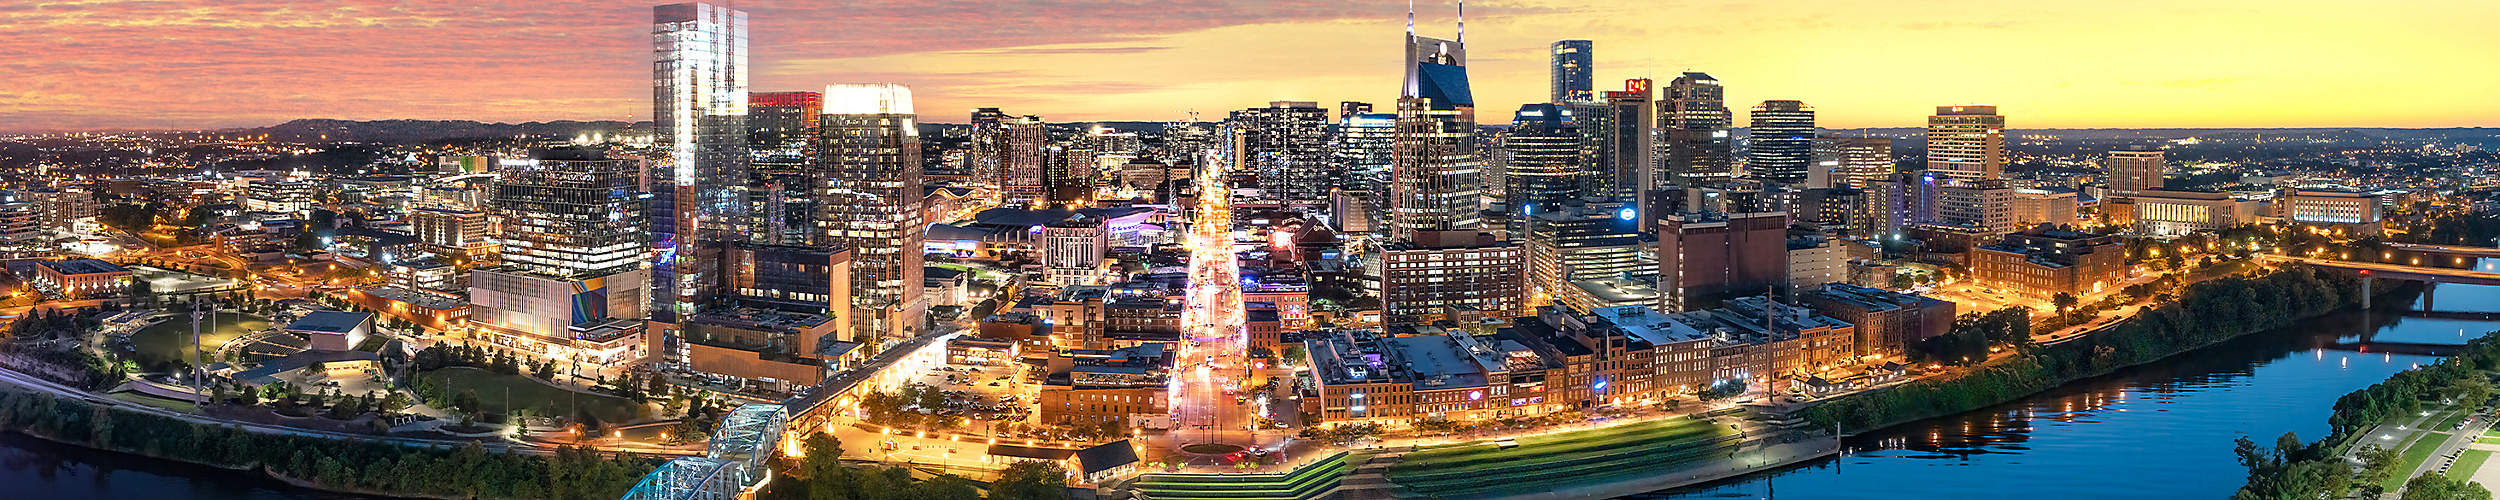 Nashville, Tennessee's skyline with Cumberland river in view at sunset